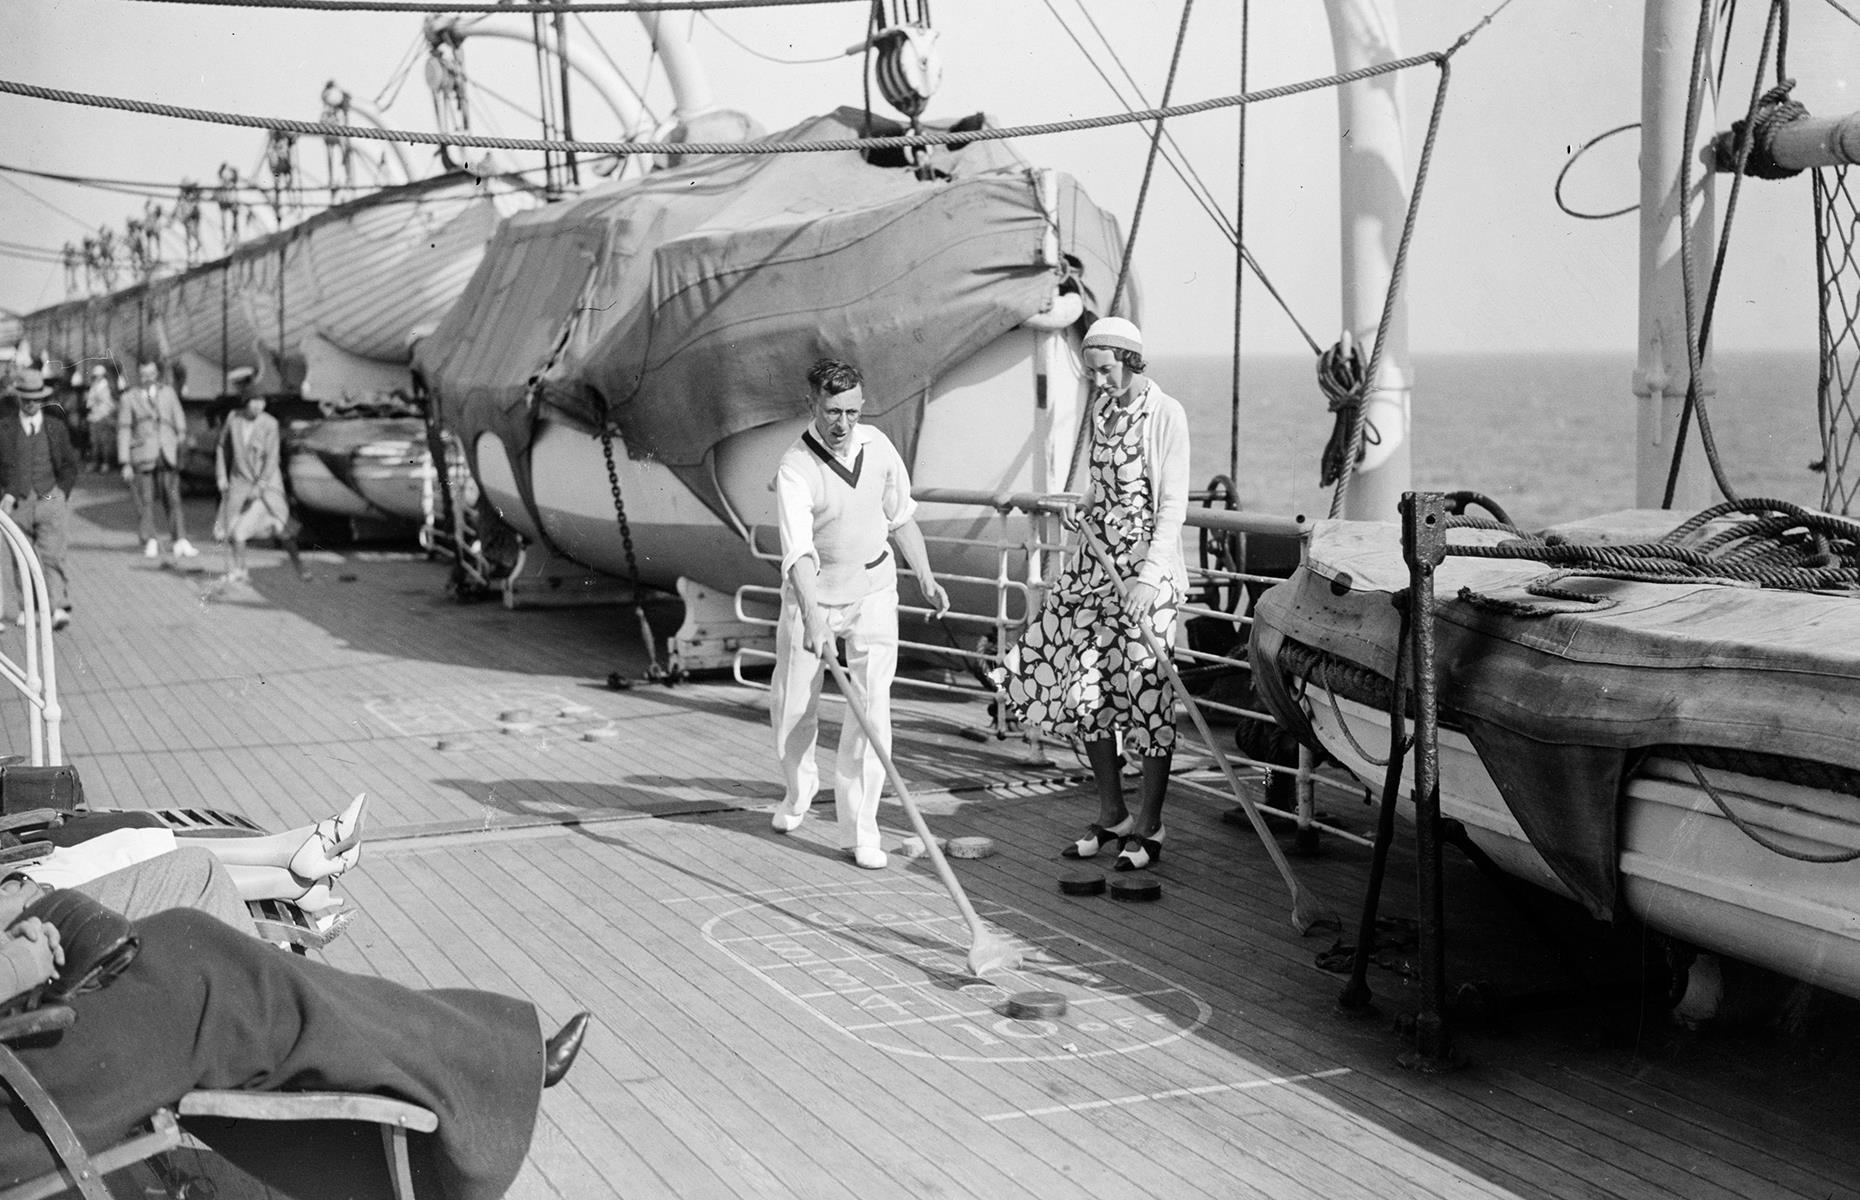 <p>From the earliest transatlantic voyages and golden-age ships to today's glittering juggernauts, we reveal 32 nostalgic images that chronicle cruise history.</p>